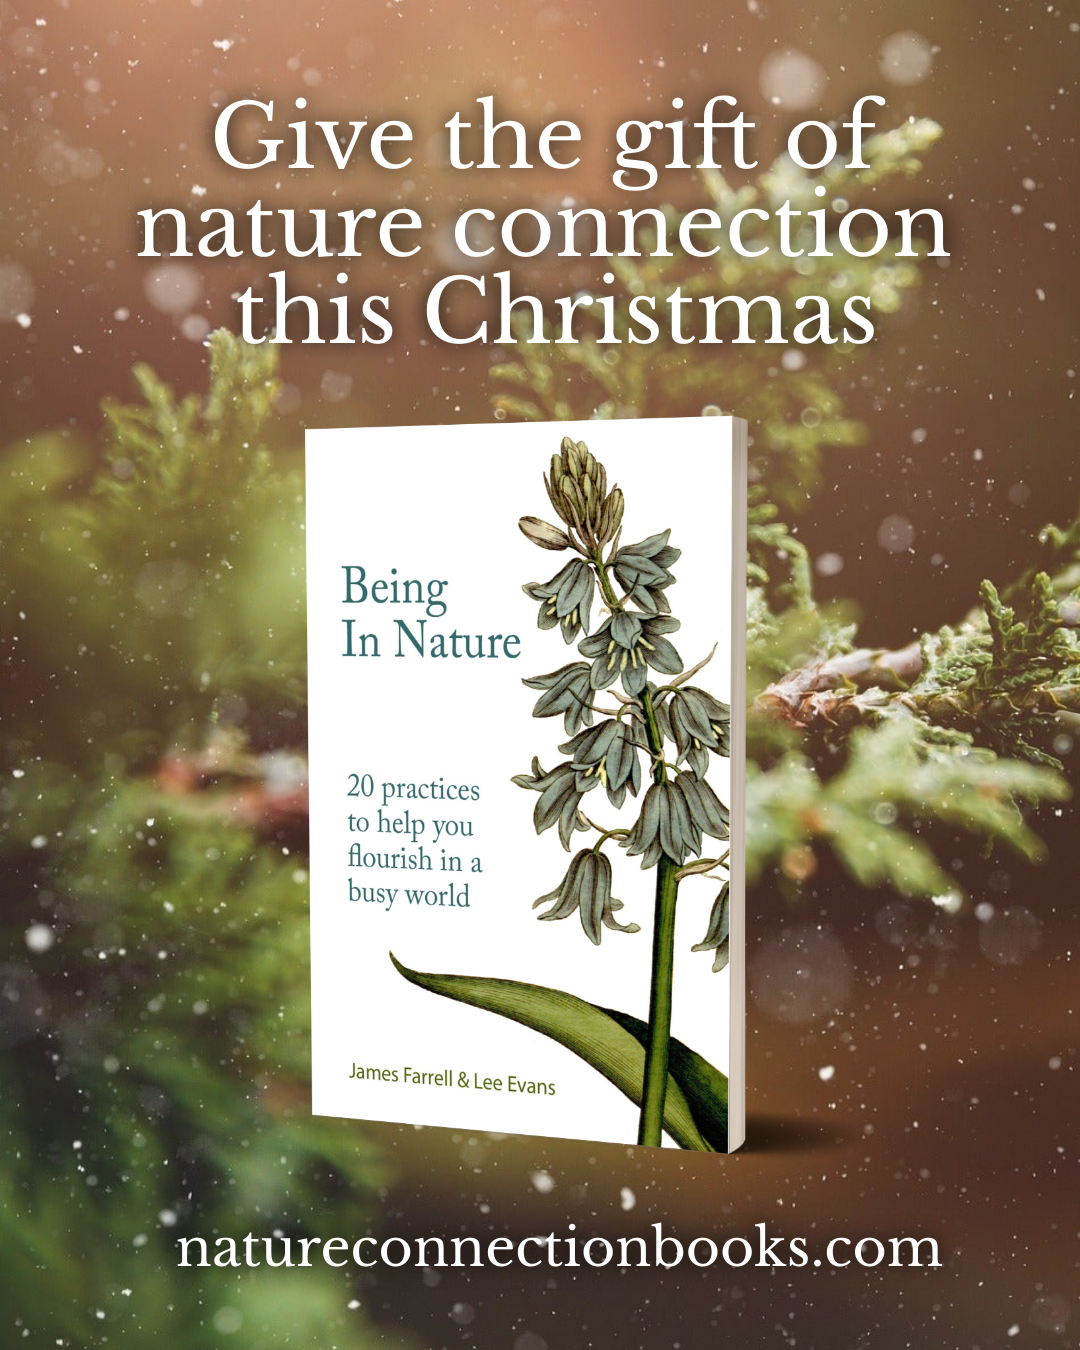 book marketing christmas advert 'being in nature'